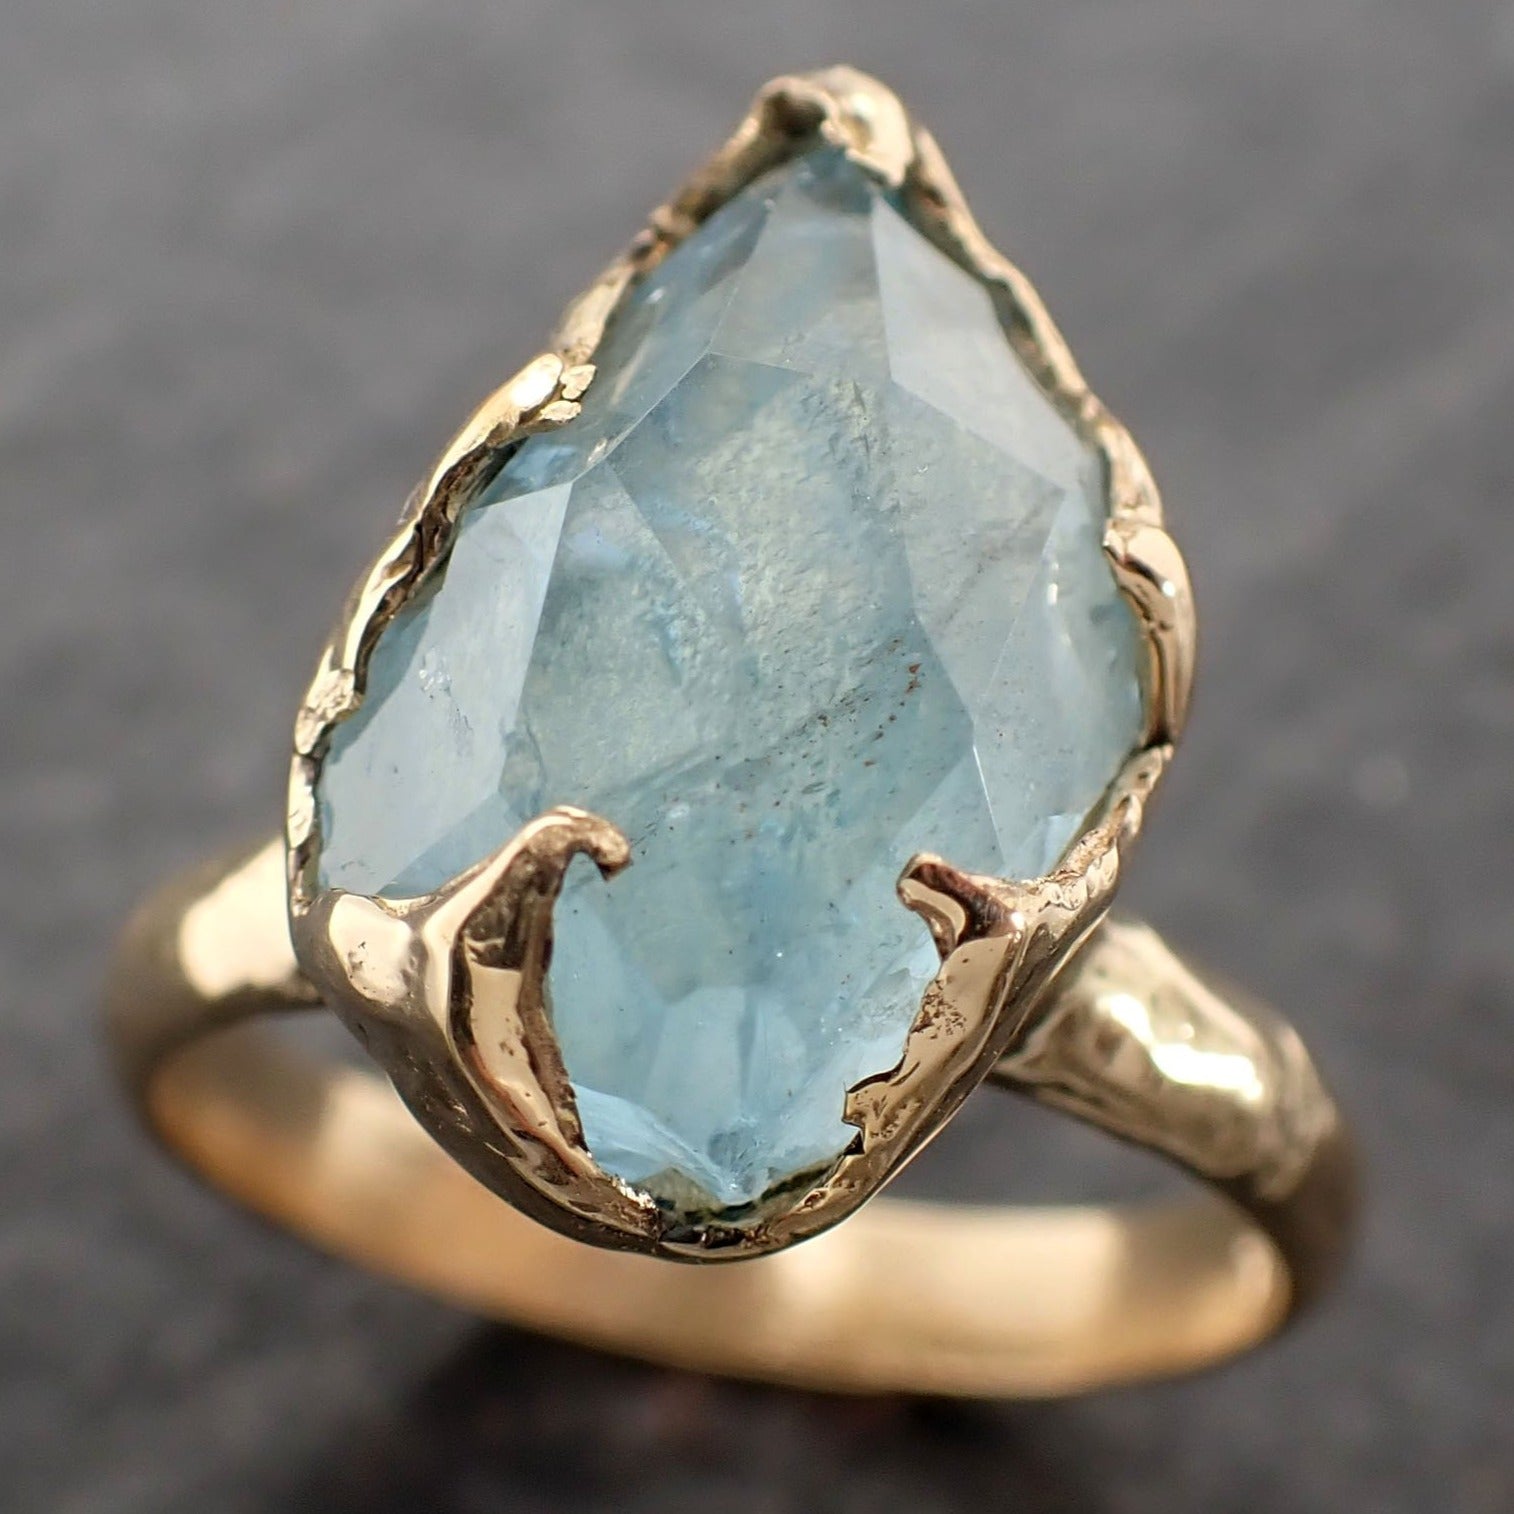 Partially faceted Aquamarine Solitaire Ring 18k gold Custom One Of a Kind Gemstone Ring Bespoke byAngeline 2531